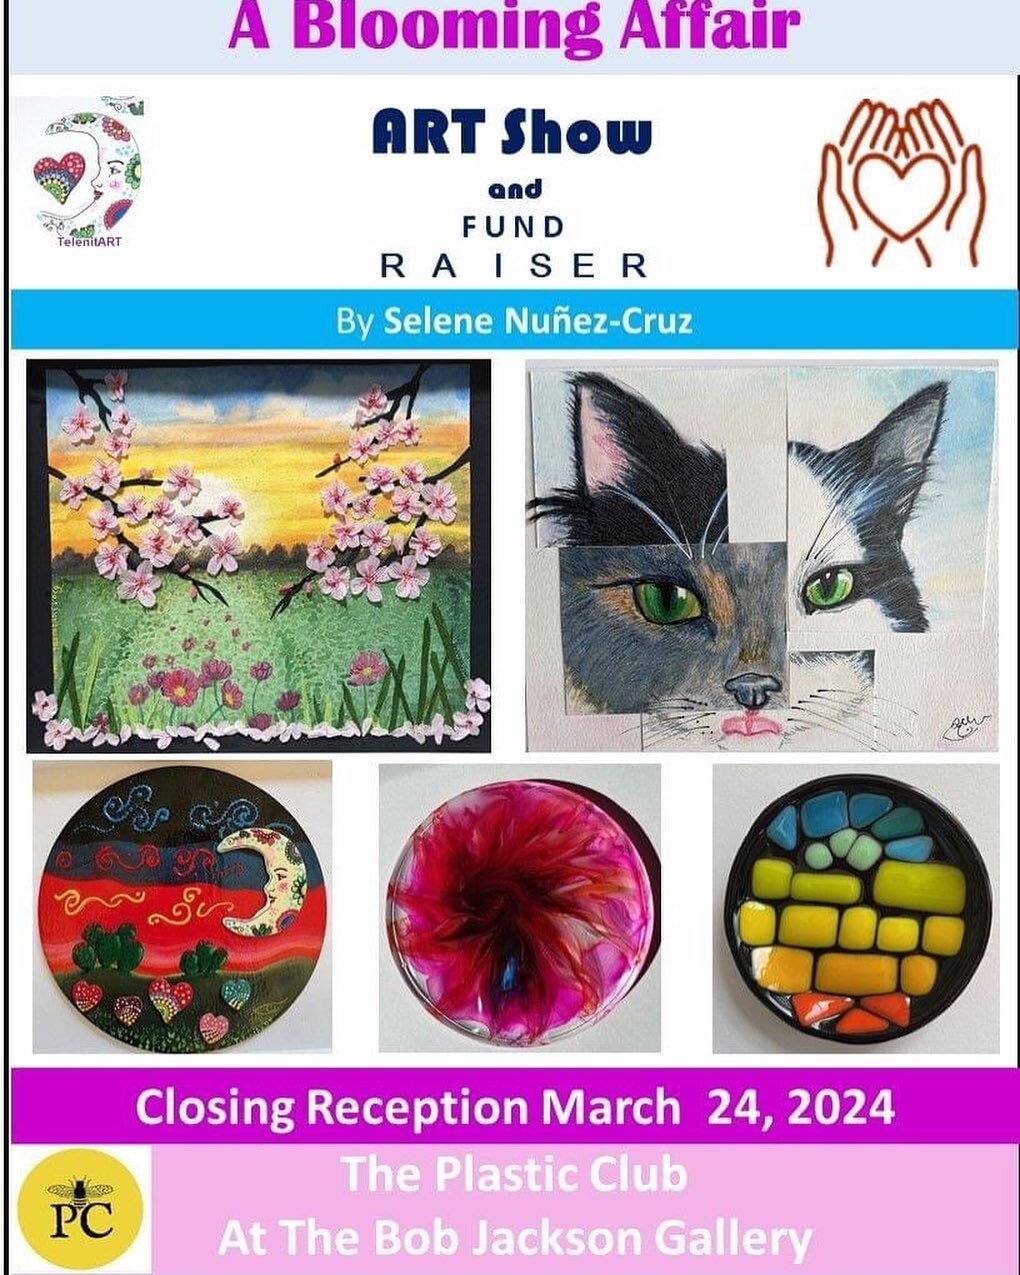 Join us for a very special closing reception for A BLOOMING AFFAIR, the March 2024 exhibit by Selene Nu&ntilde;ez-Cruz (@telenitart ) in the Bob Jackson Gallery this Sunday, 3/24, from 2-5 PM.

Sales from this show support fundraising efforts for the